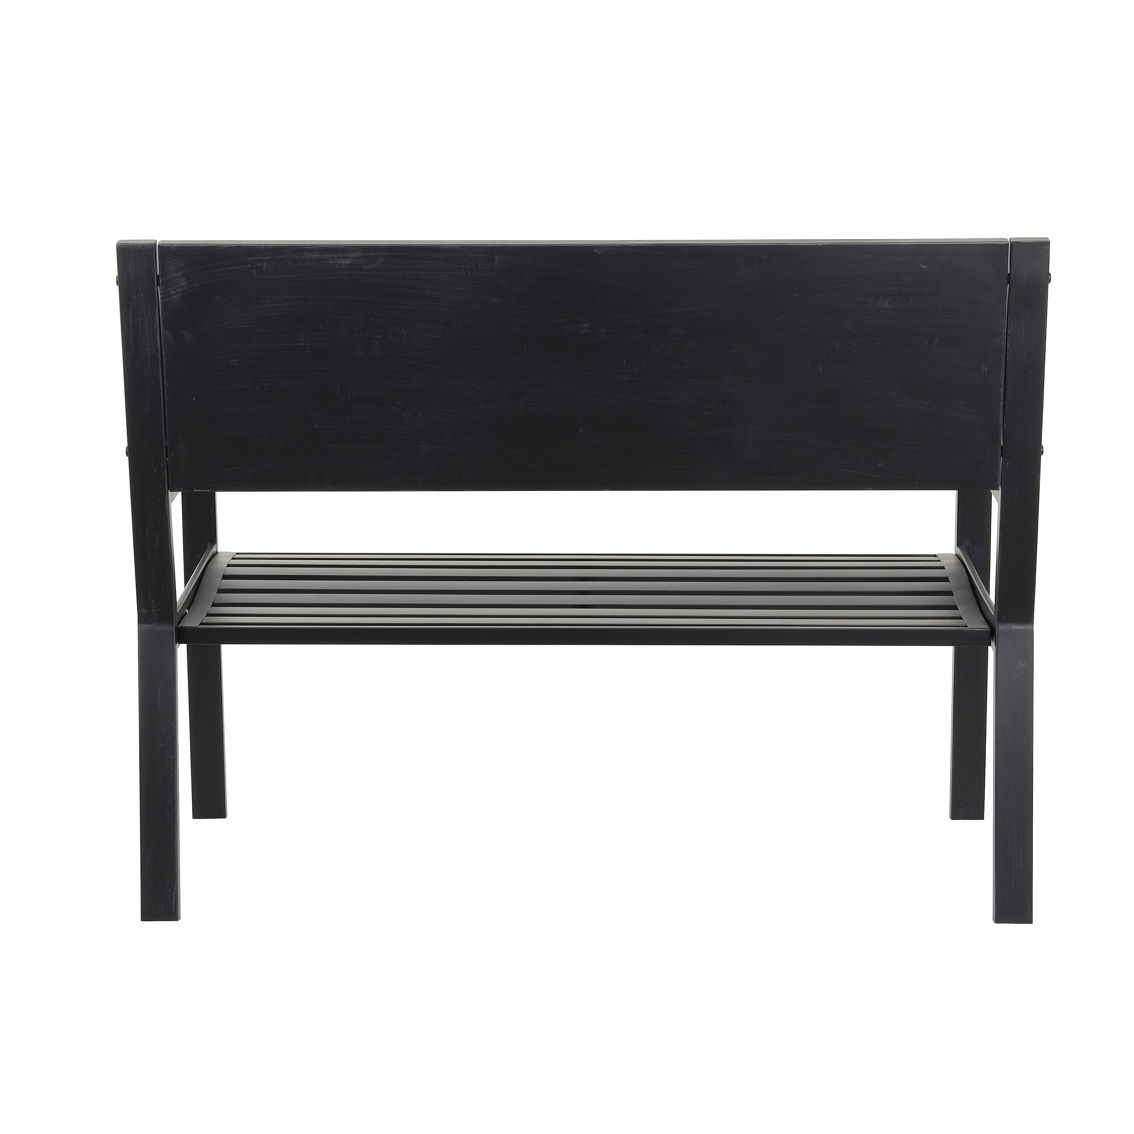 Morgan Hill Home Traditional White Metal Outdoor Bench - Image 3 of 5